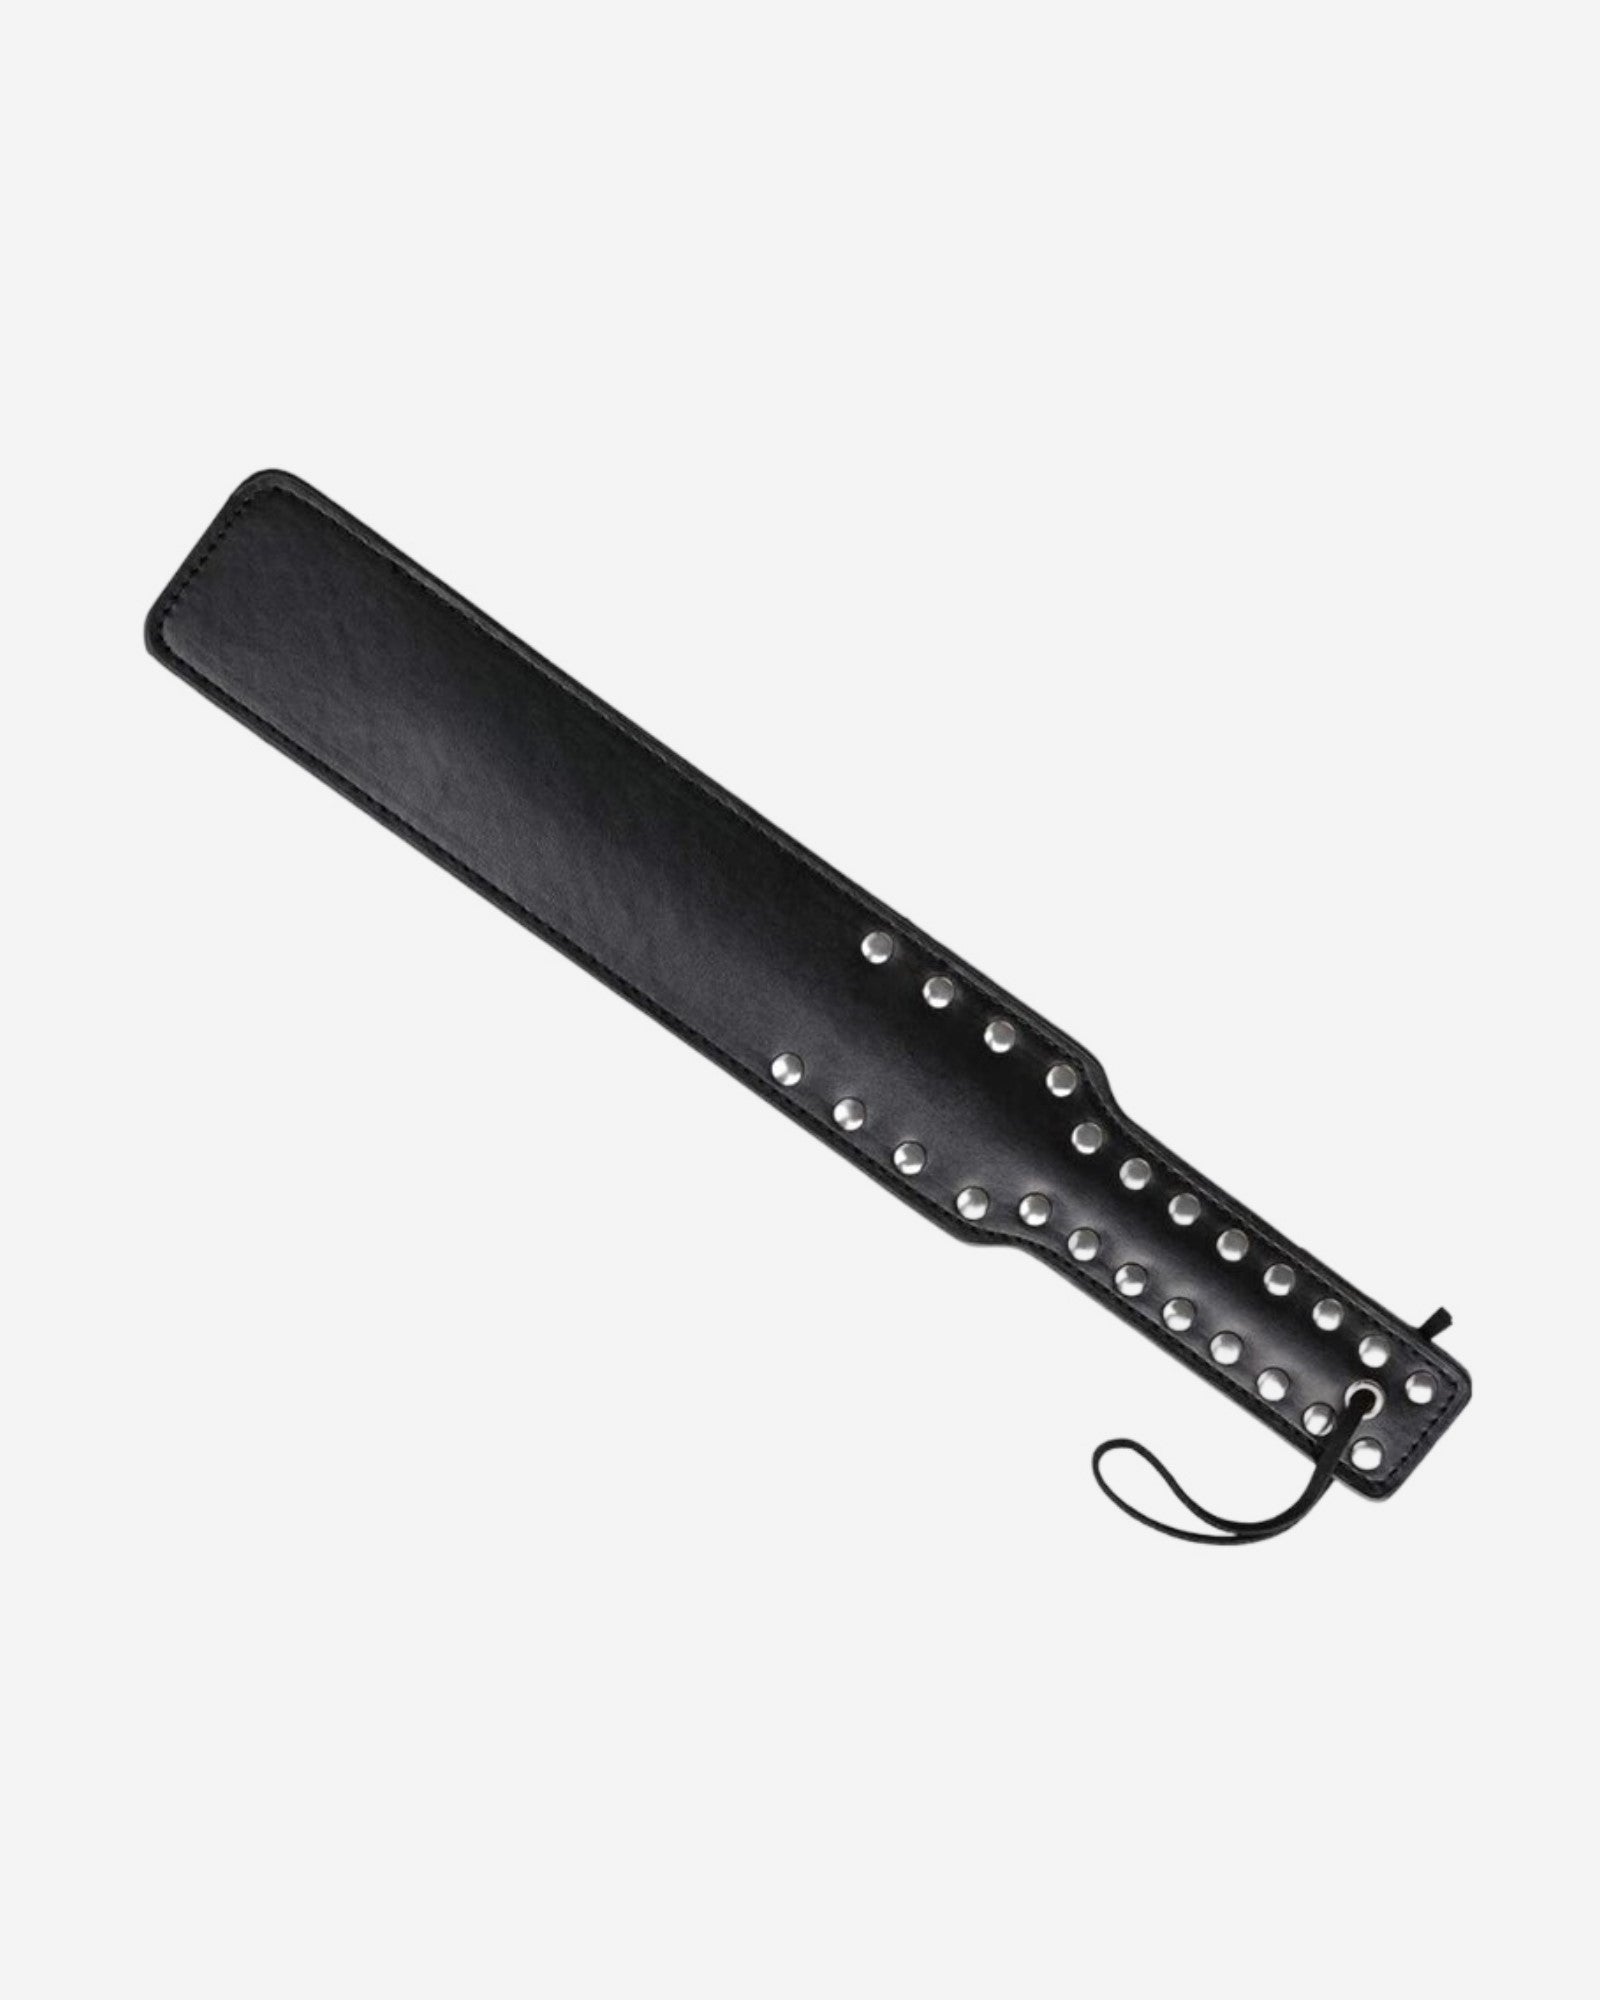 Leather Accessories Flogged Spanking Paddle